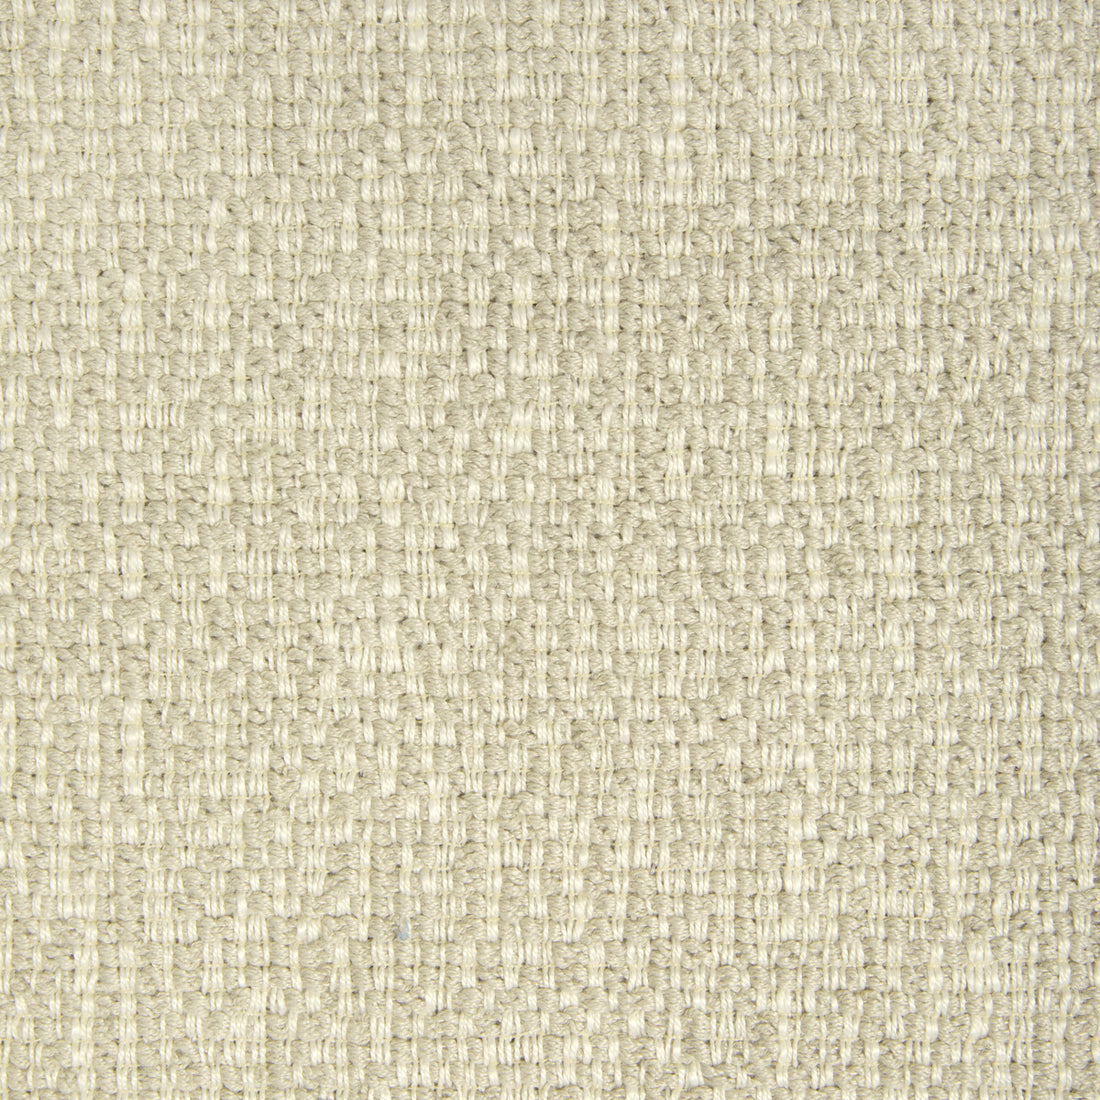 Kravet Design fabric in 36886-1116 color - pattern 36886.1116.0 - by Kravet Design in the Inside Out Performance Fabrics collection